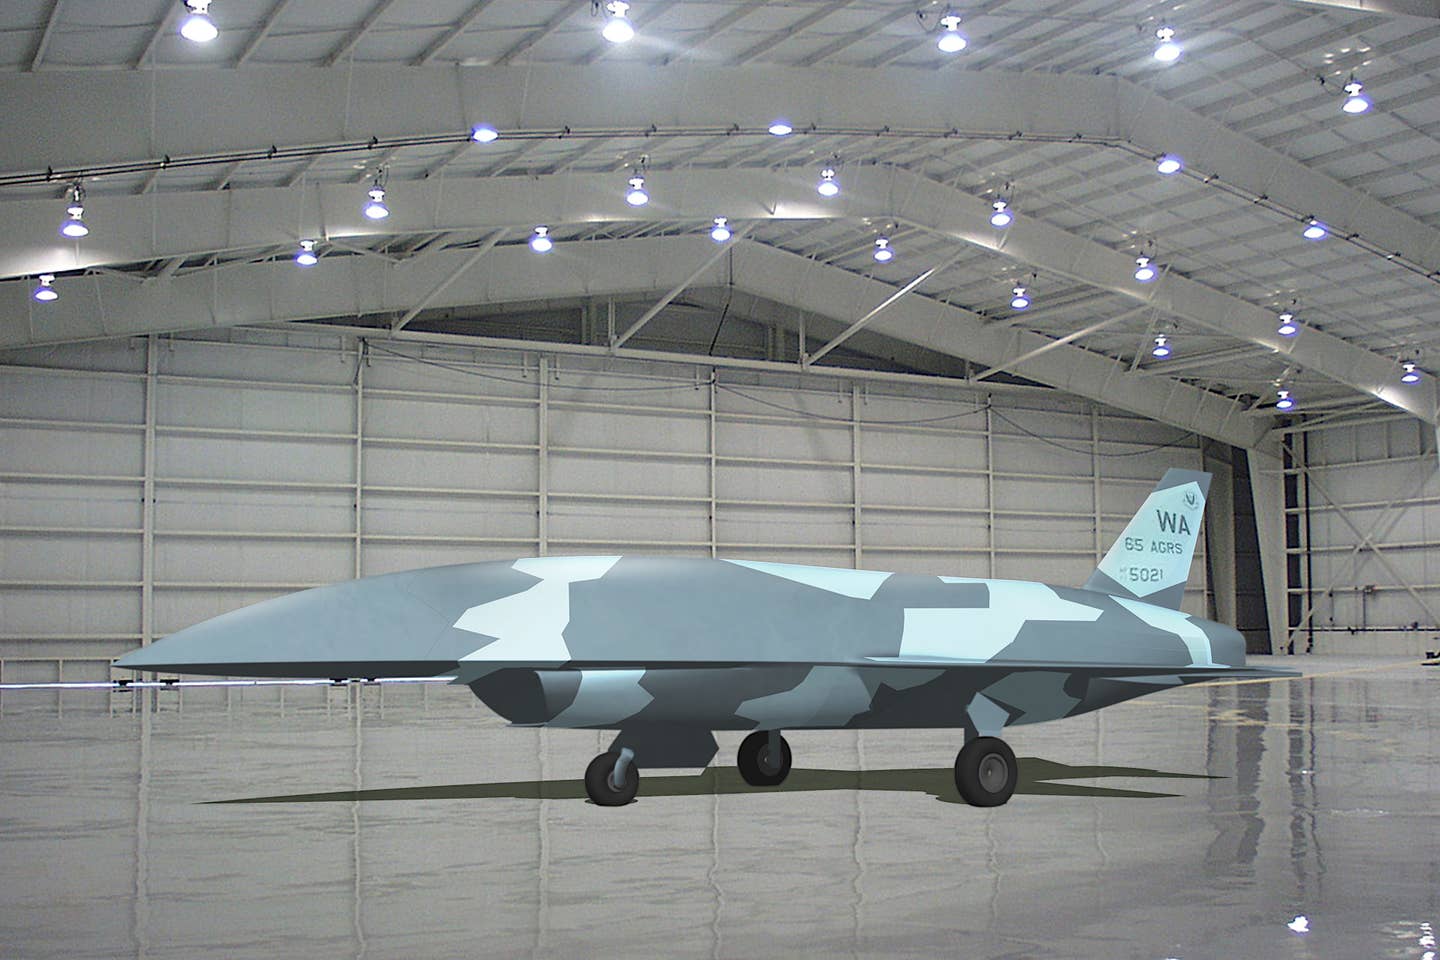 A rendering of Blue Force Technologies' Fury aggressor drone. Note the camouflage scheme inspired by the one worn by F-35A stealth fighters assigned to the U.S. Air Force's 65th Aggressor Squadron and that squadron's markings on the tail. <em>Blue Force Technologies</em>